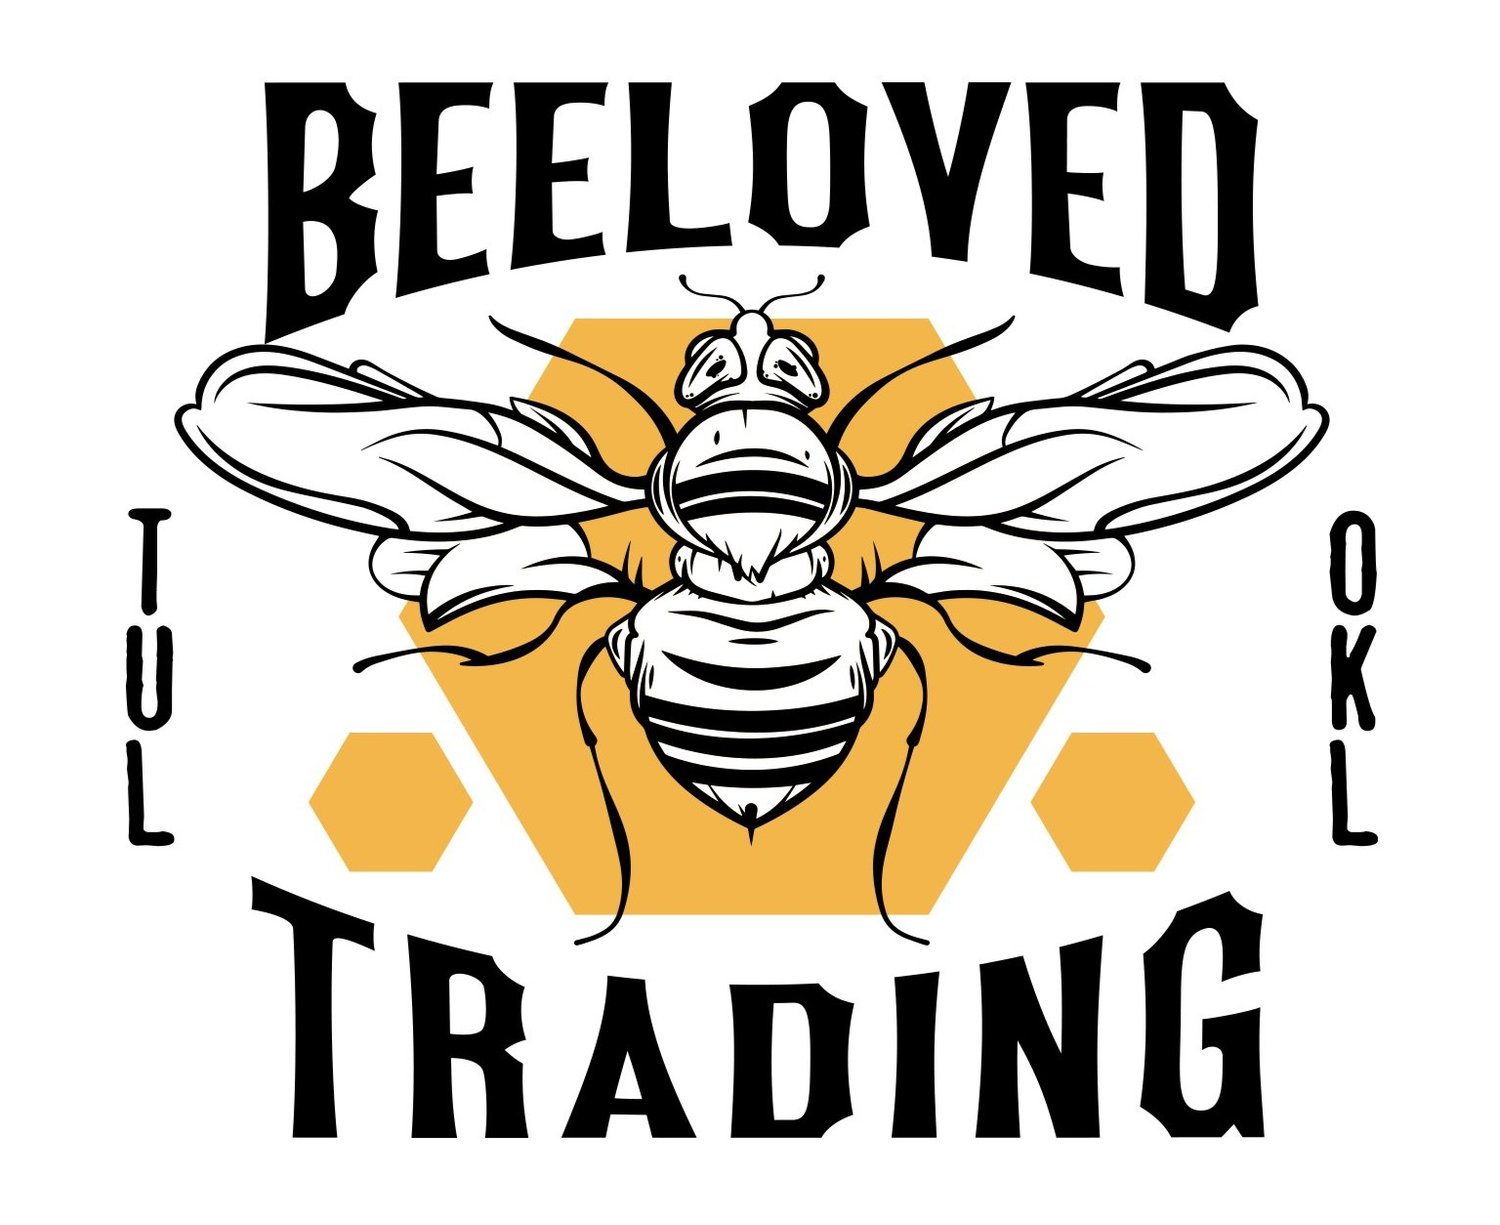 BeeLoved Trading